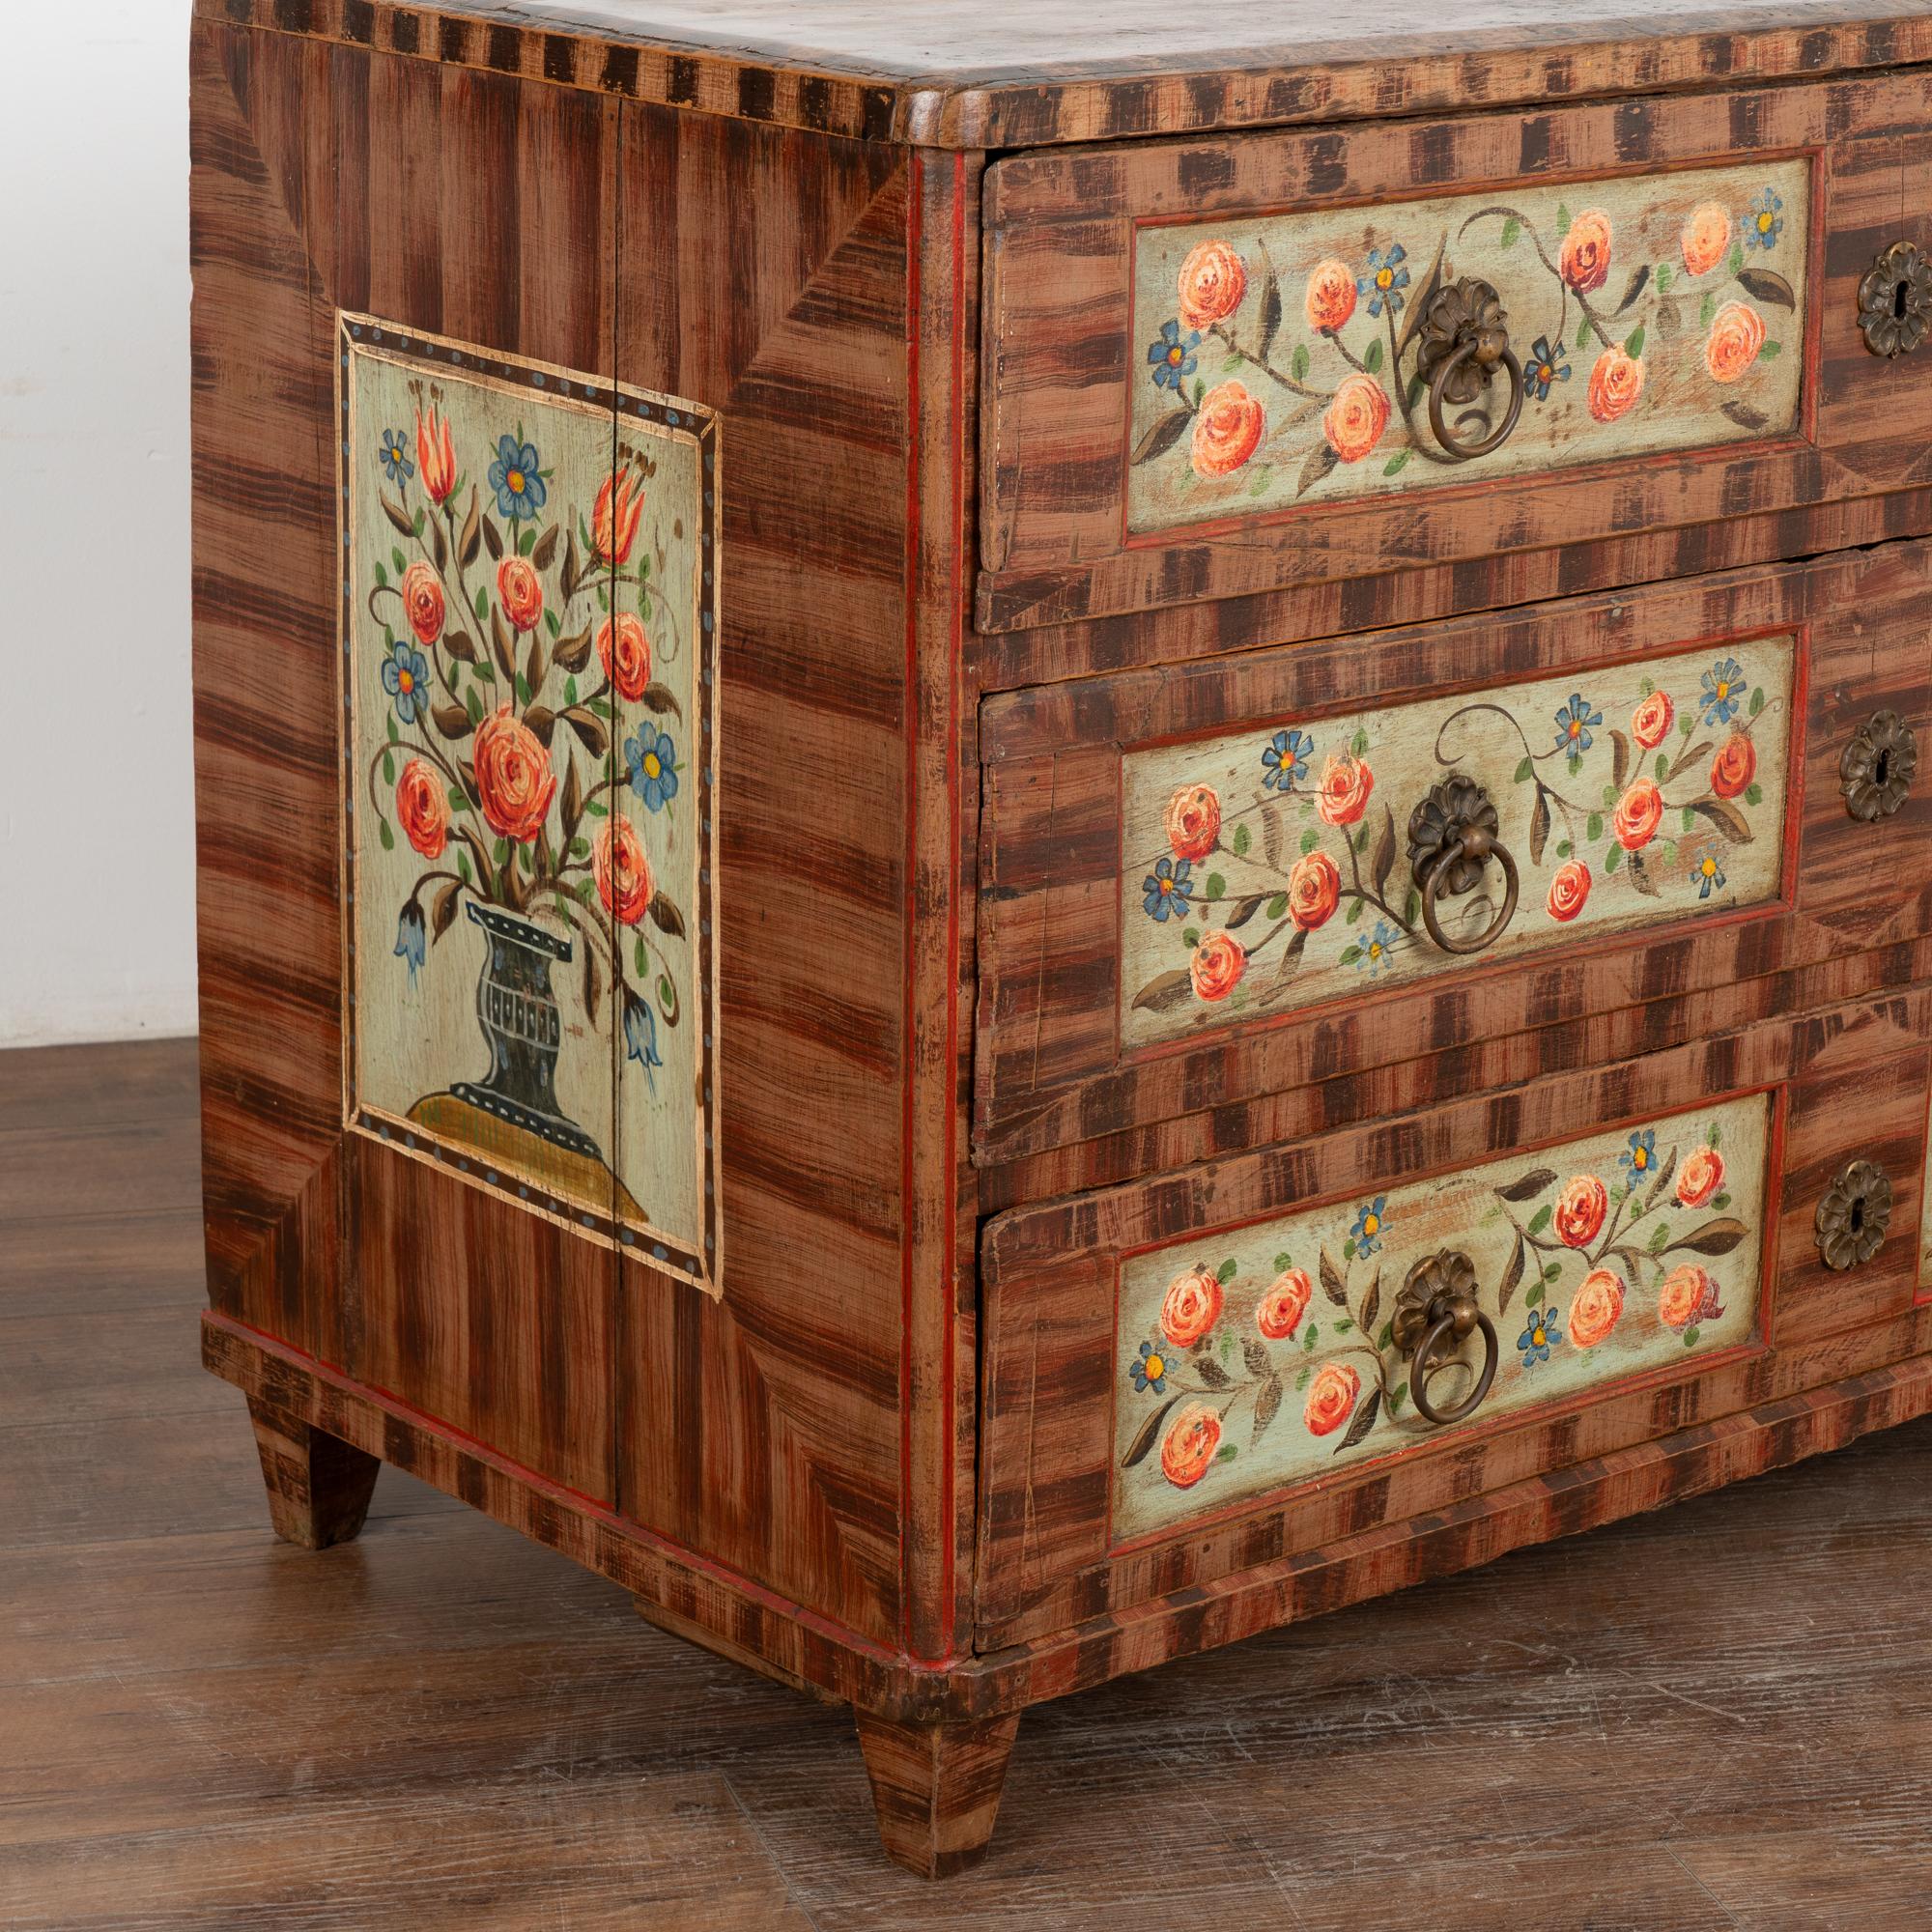 Brass Original Painted Chest of 3 Drawers Blanket Chest With Flowers, Circa 1860-80